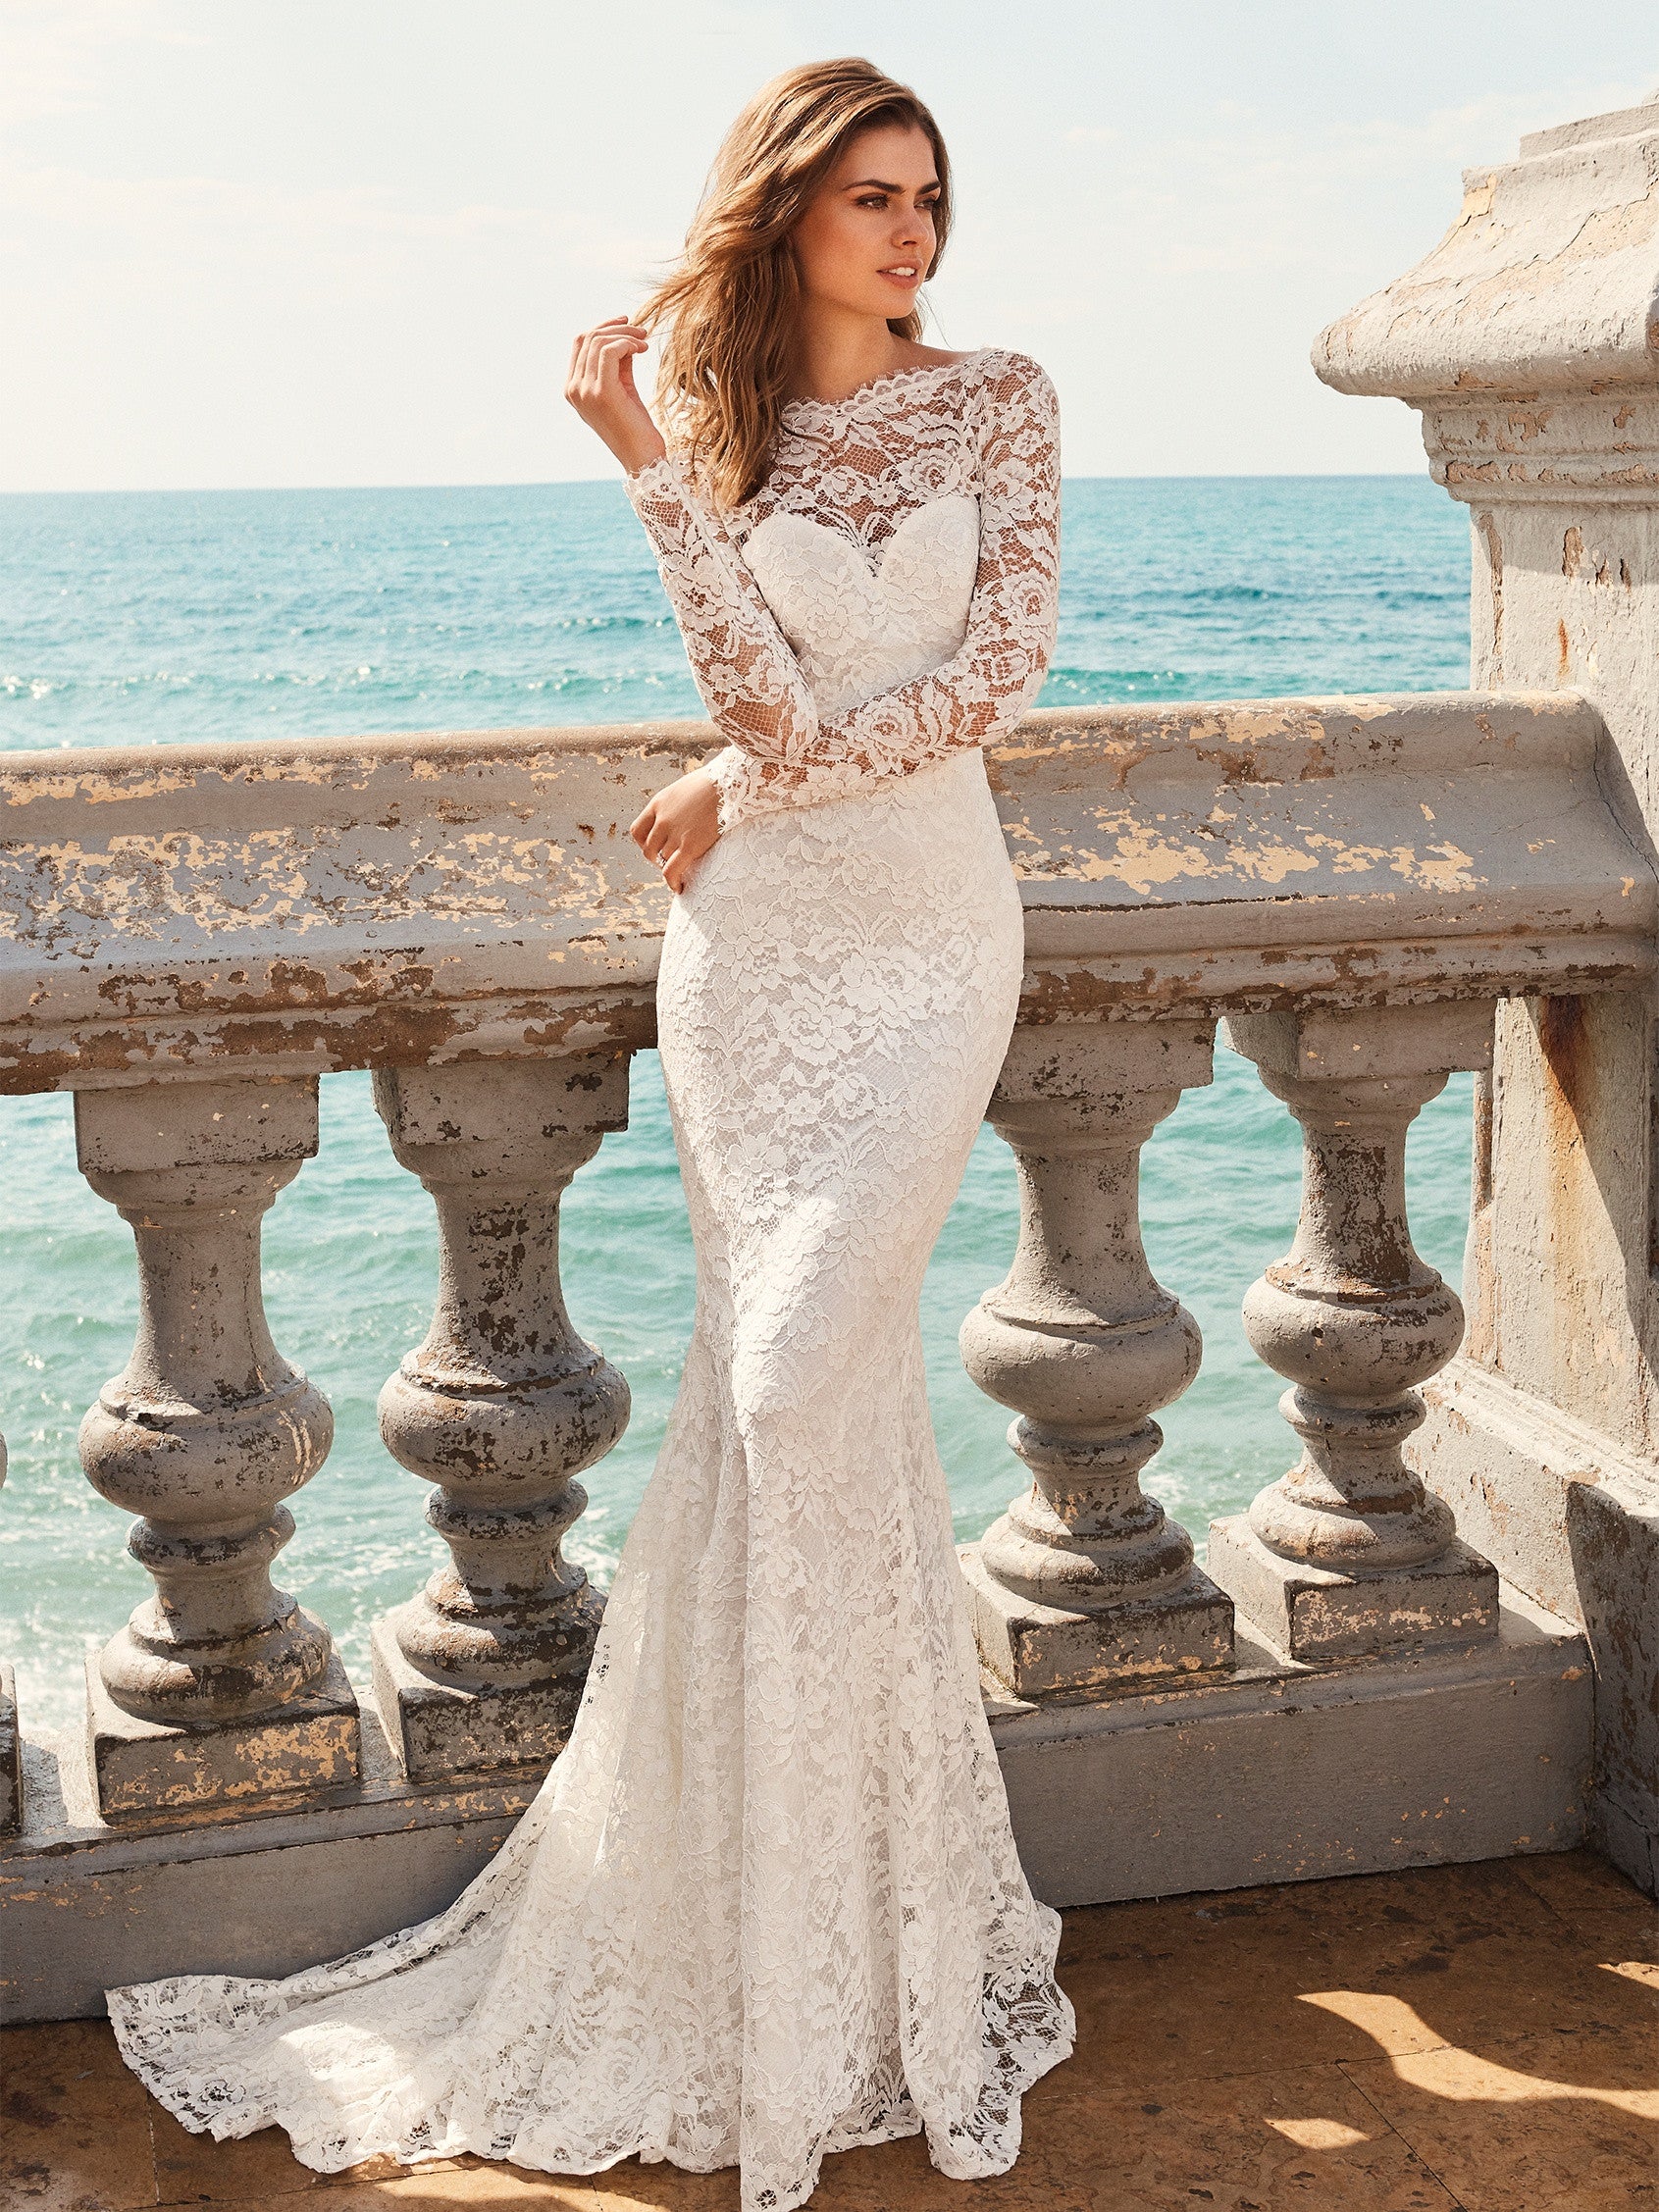 Pronovias White One Bridal JIANNA  Exquisite mermaid style wedding dress in lace. The sweetheart neckline combined with the semi-sheer tulle in the bateau neckline and long sleeves adds lots of sensuality. As does the incredible back.  IN STOCK FOR IMMEDIATE DELIVERY!  Size US 10    